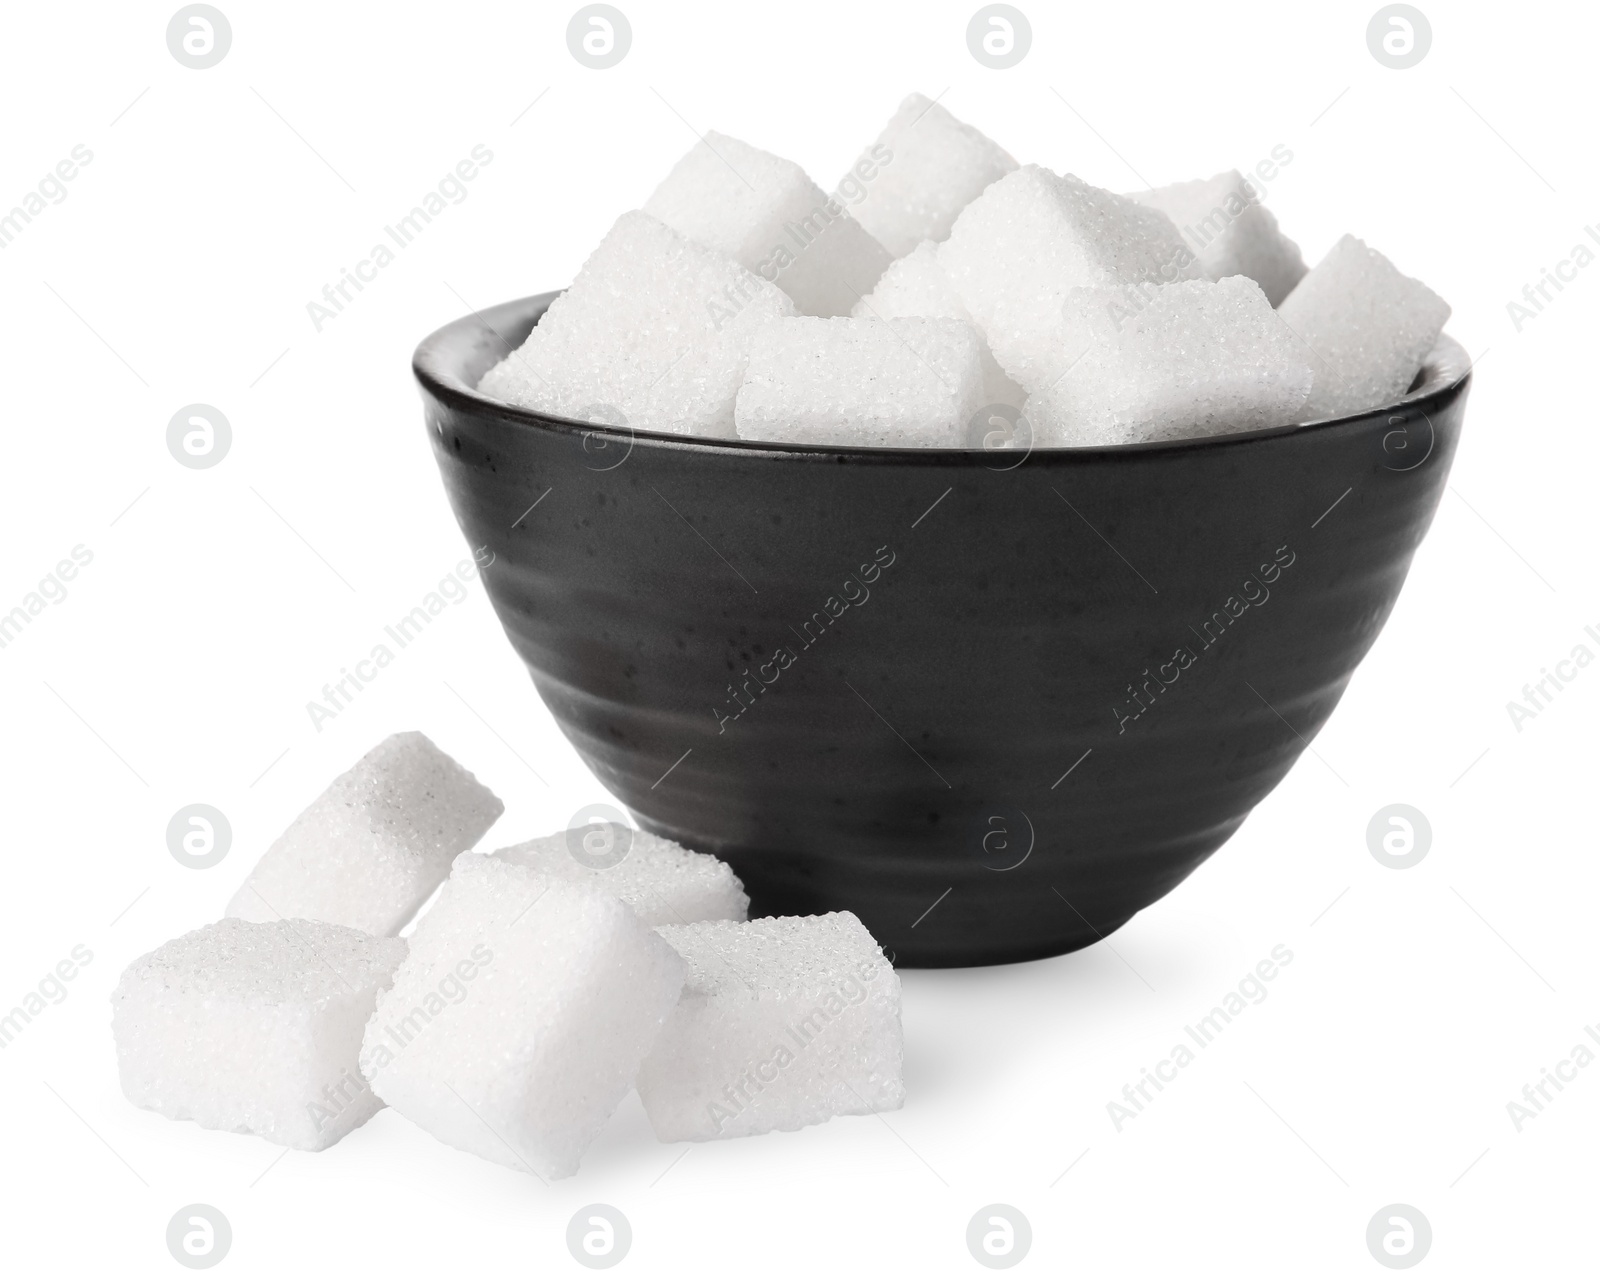 Photo of Bowl and refined sugar cubes on white background